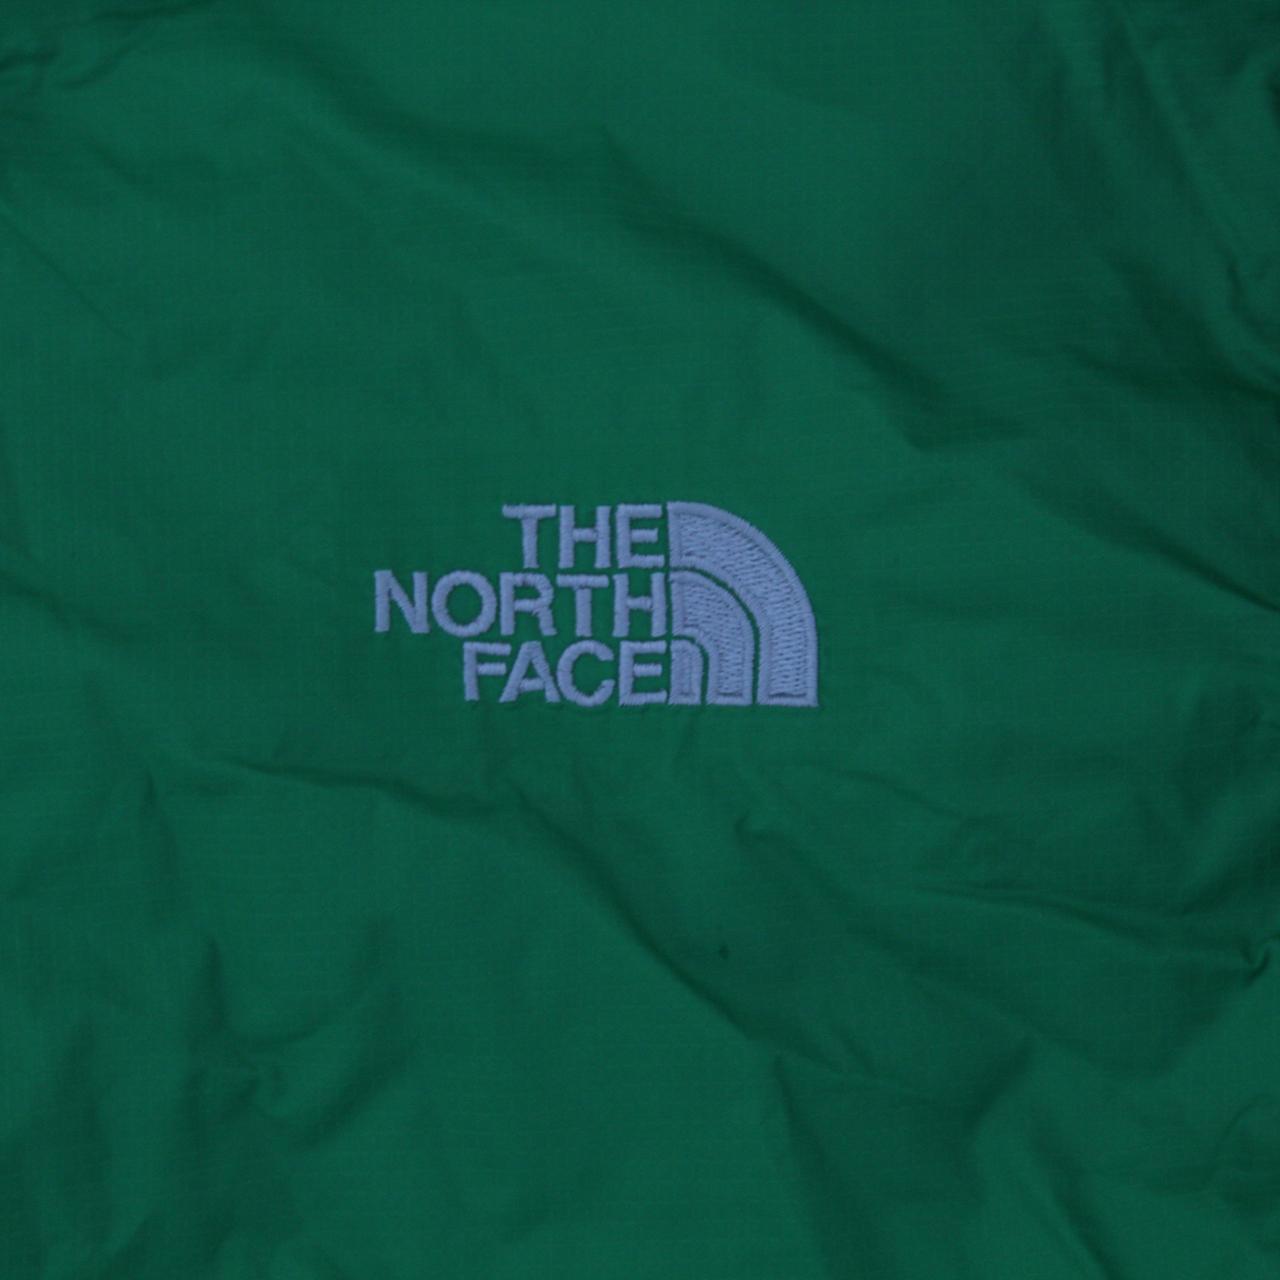 The North Face Men's Green Jacket (3)